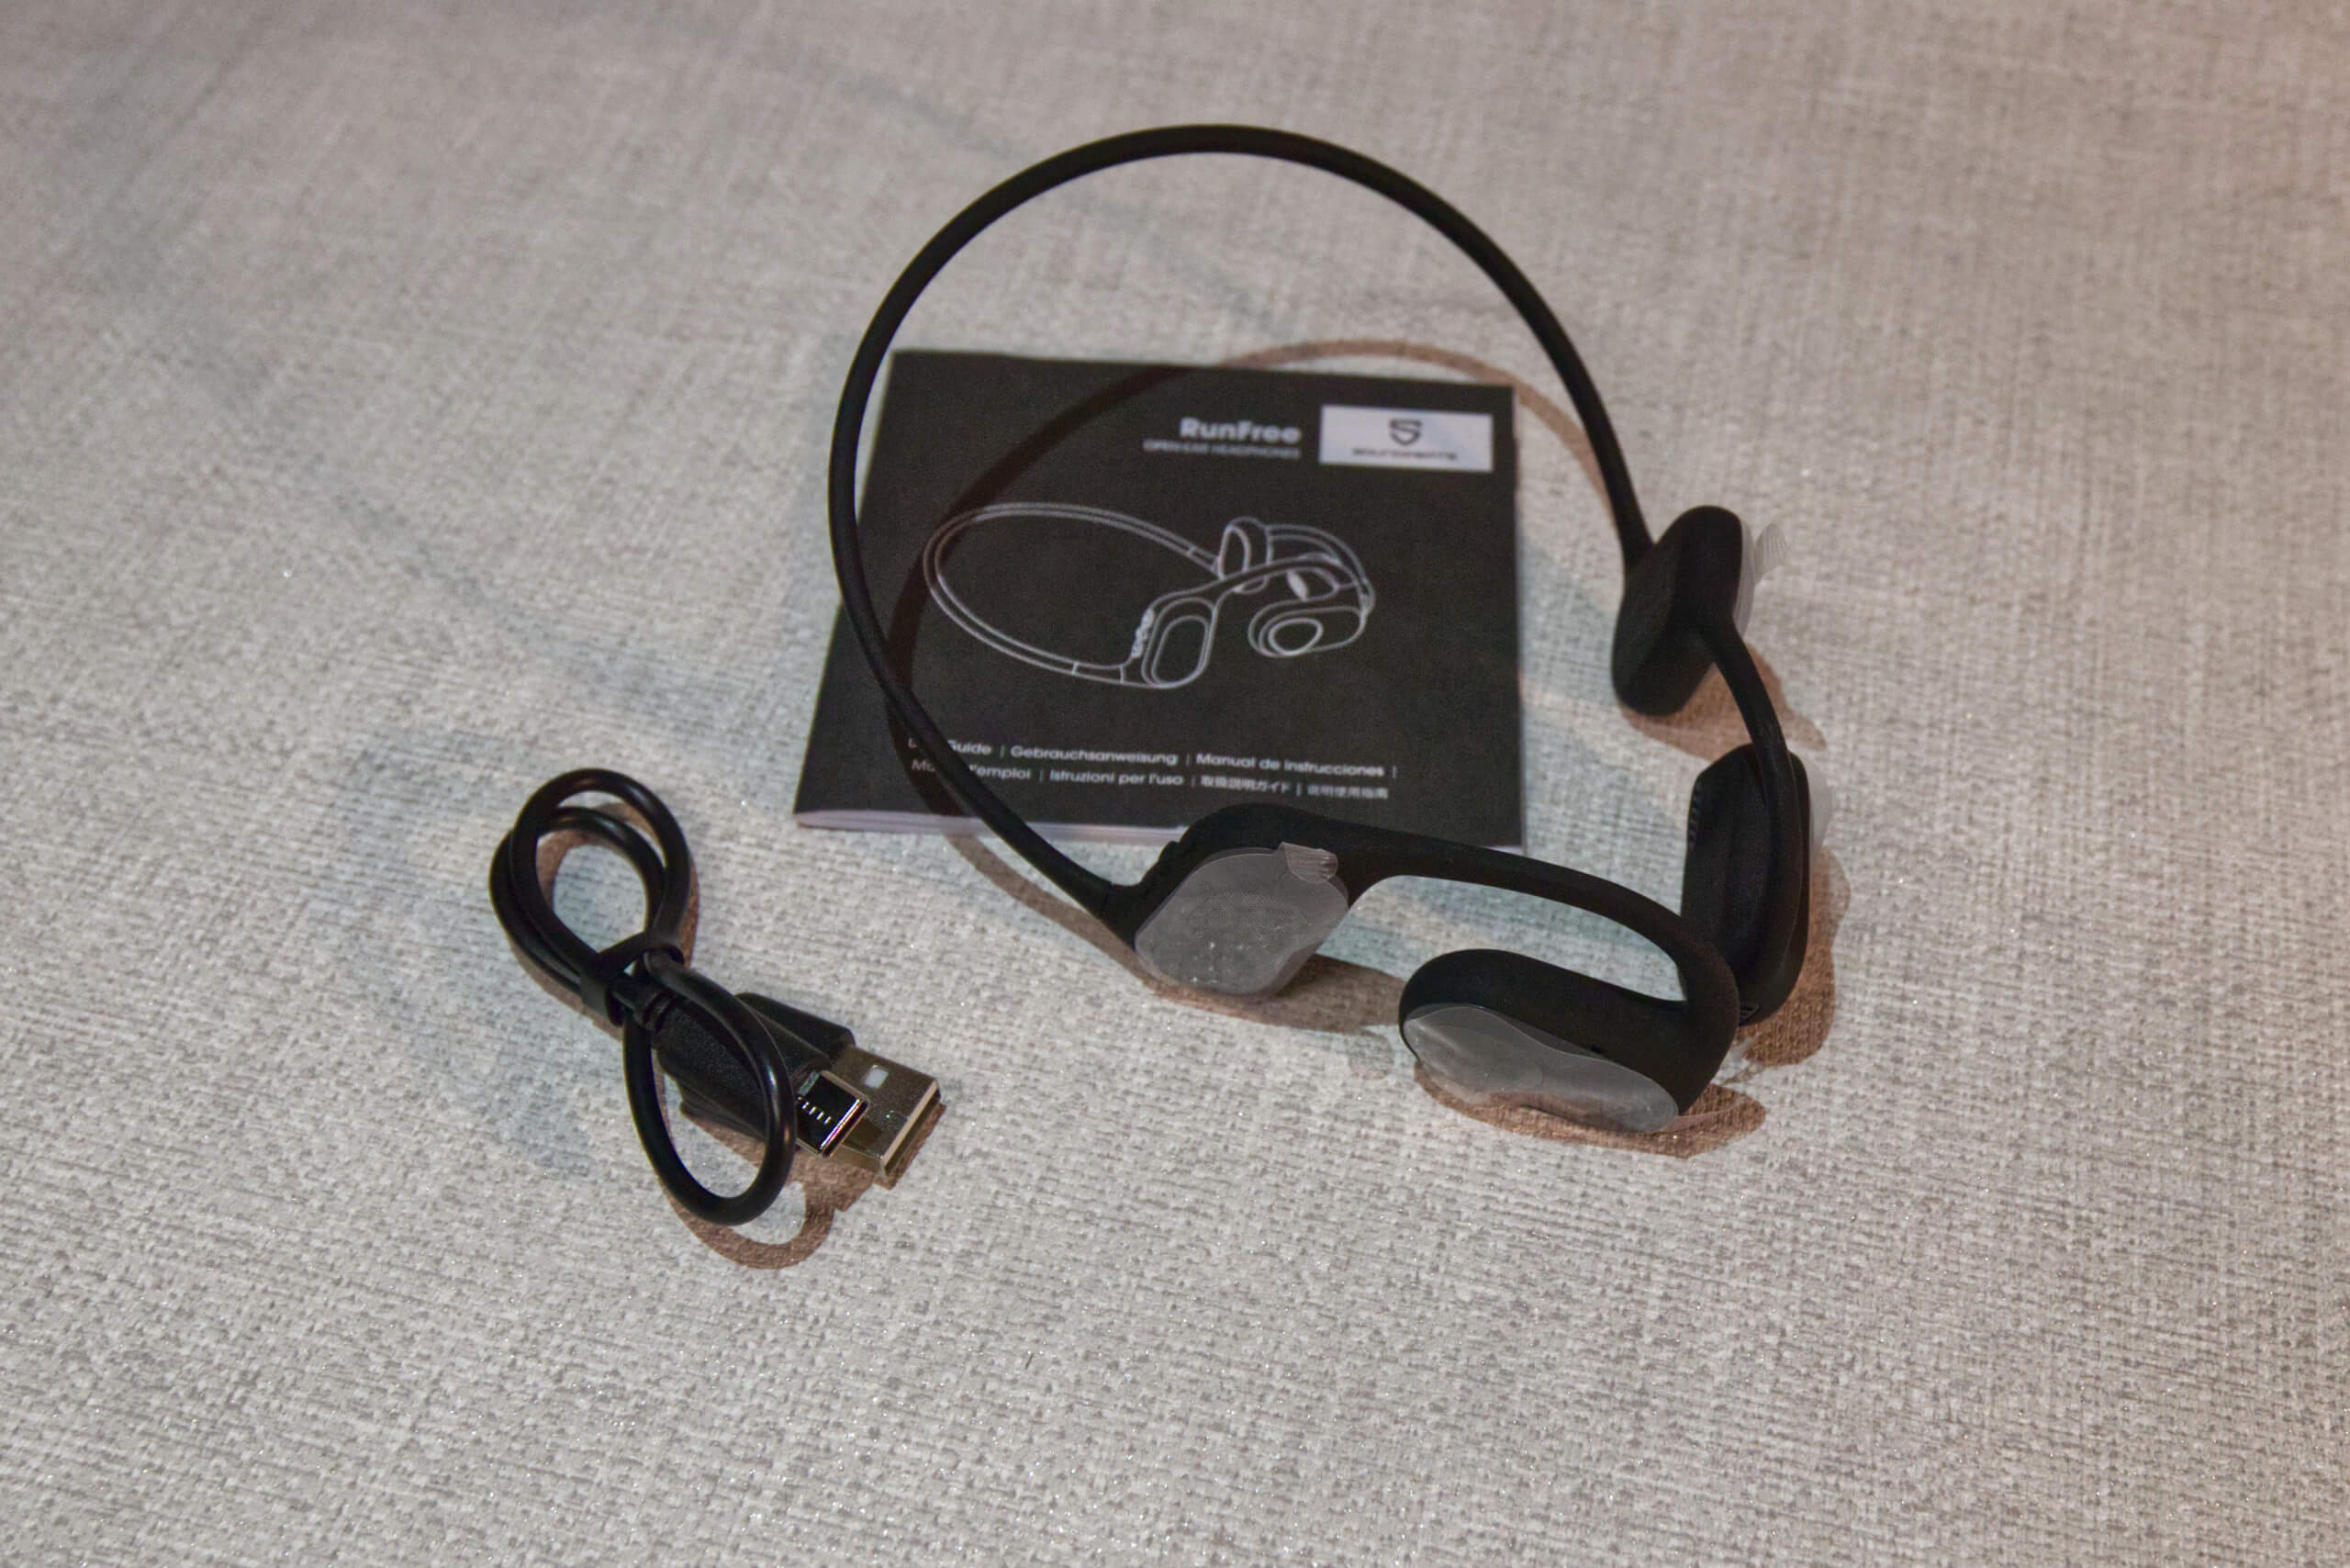 Photo shows the SoundPeats headphones next to their charger cable and the "how-to-use" manual